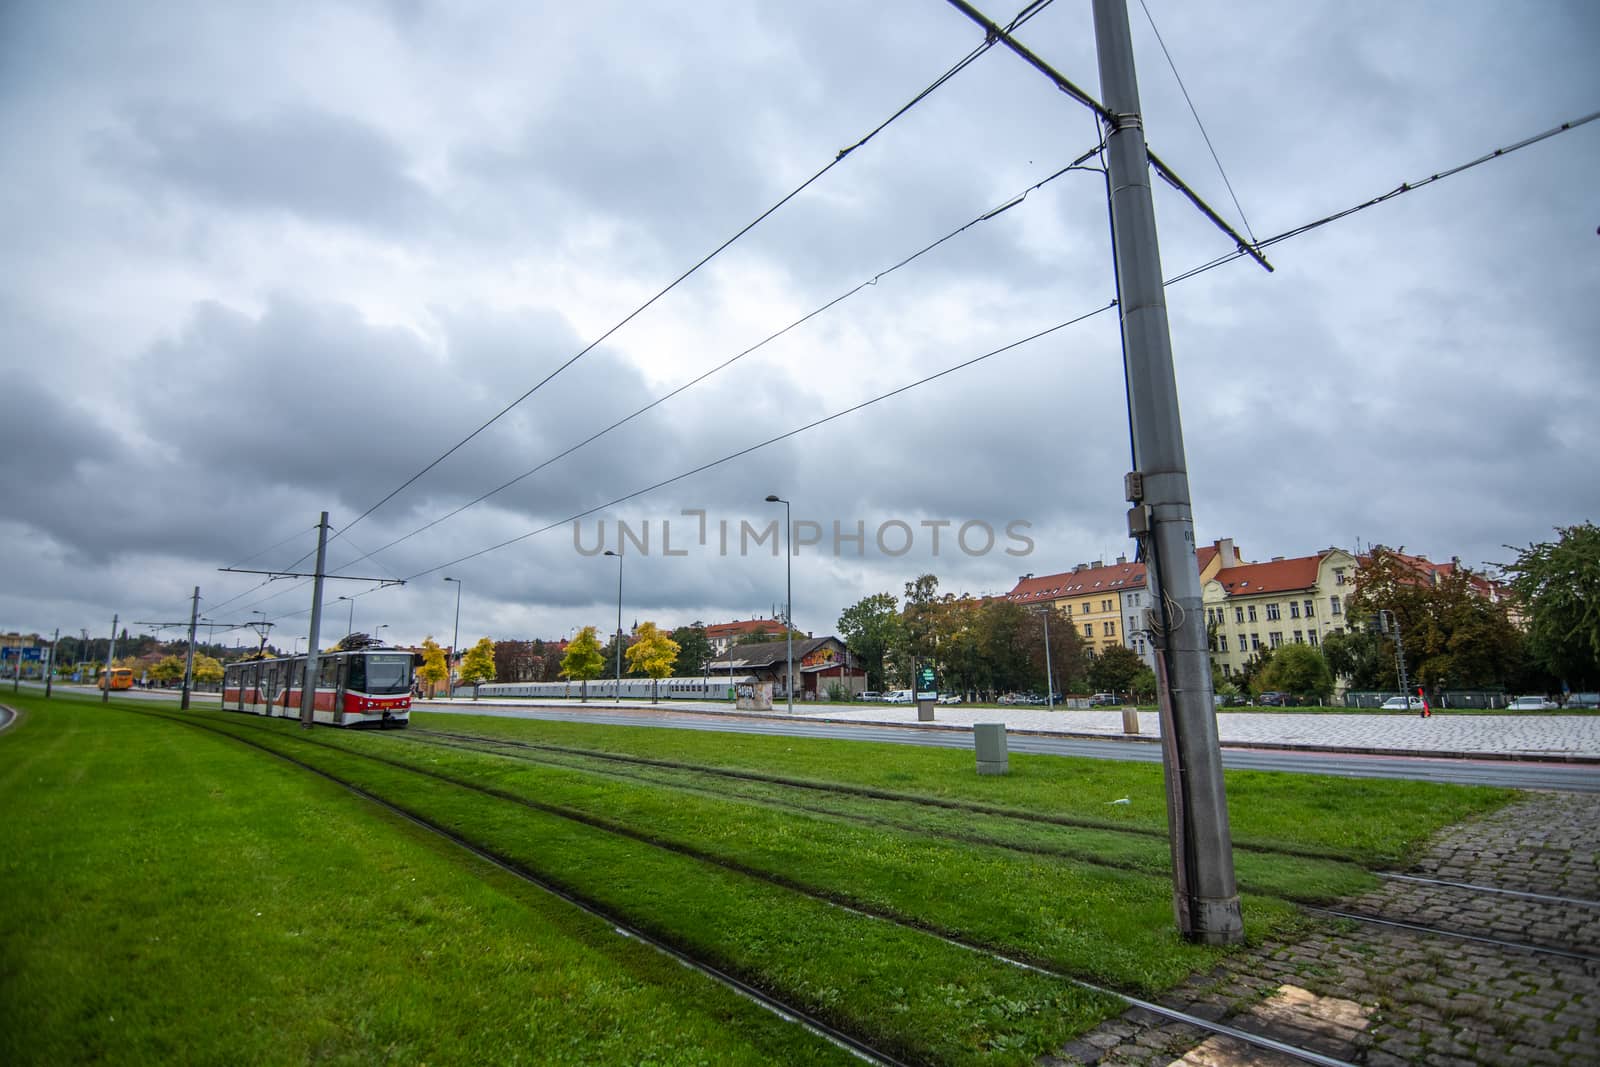 Tram after crossing Hradcanska in Prague cloudy day by gonzalobell